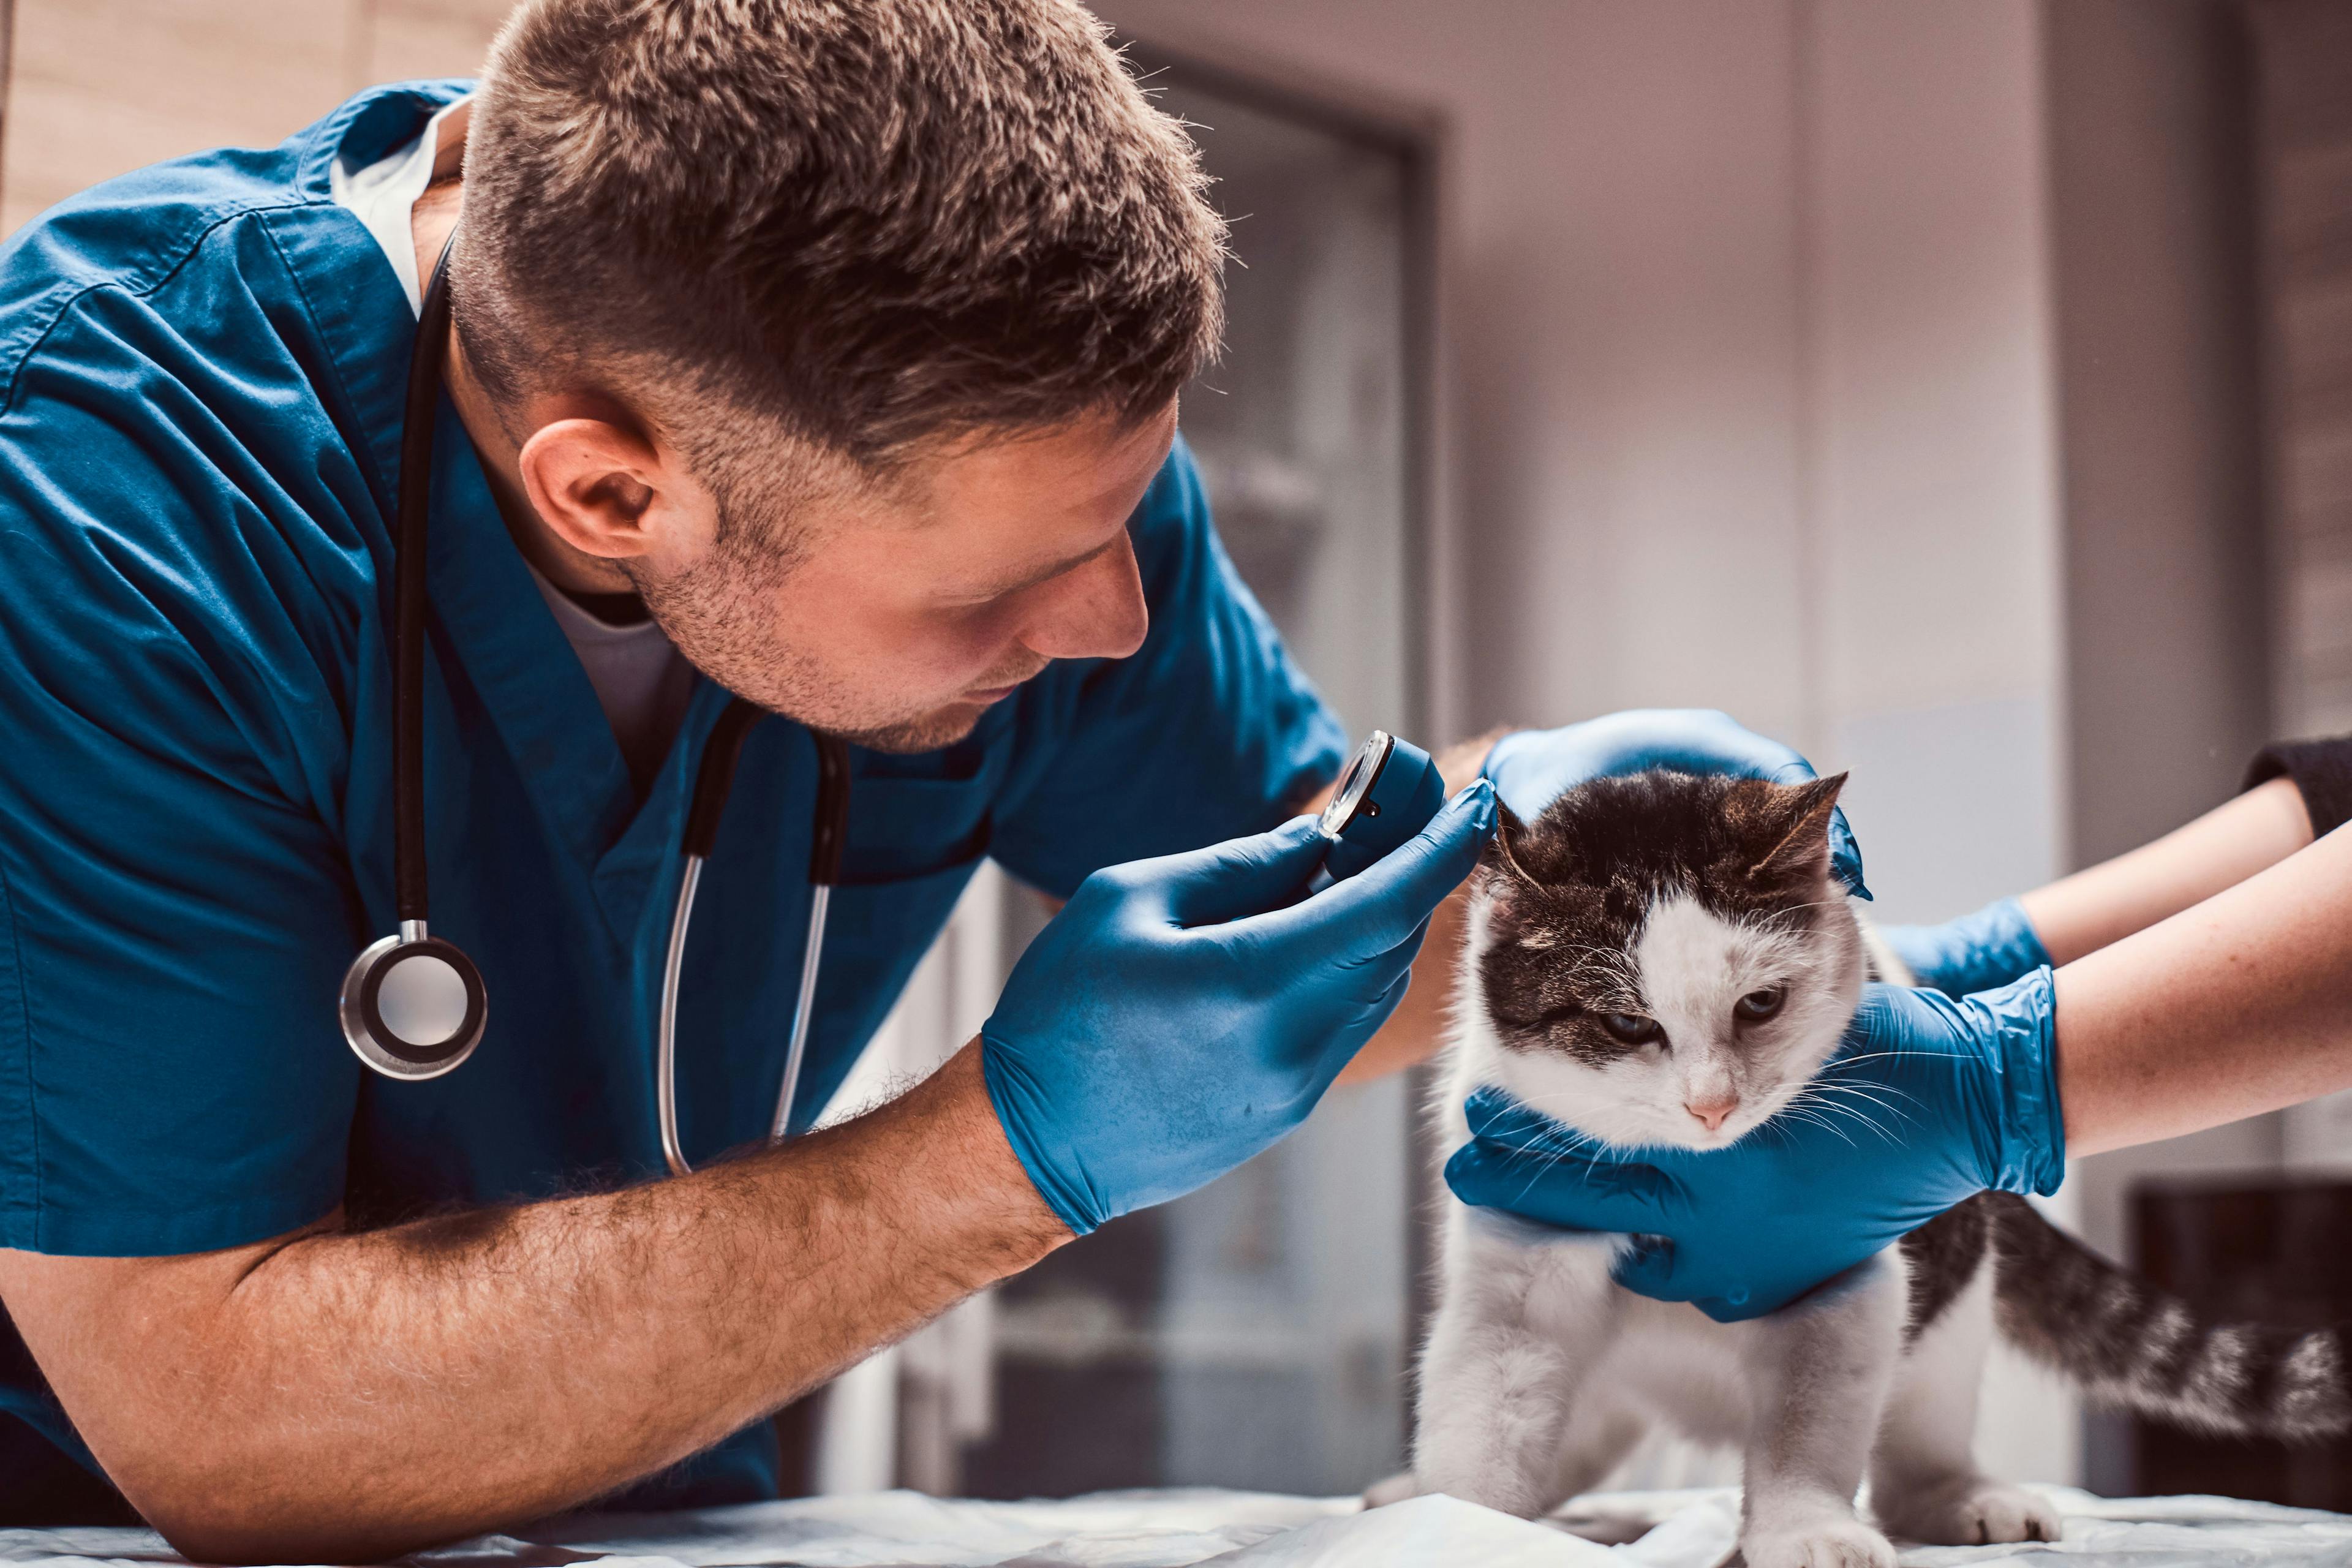 Pros and cons of being a relief veterinarian